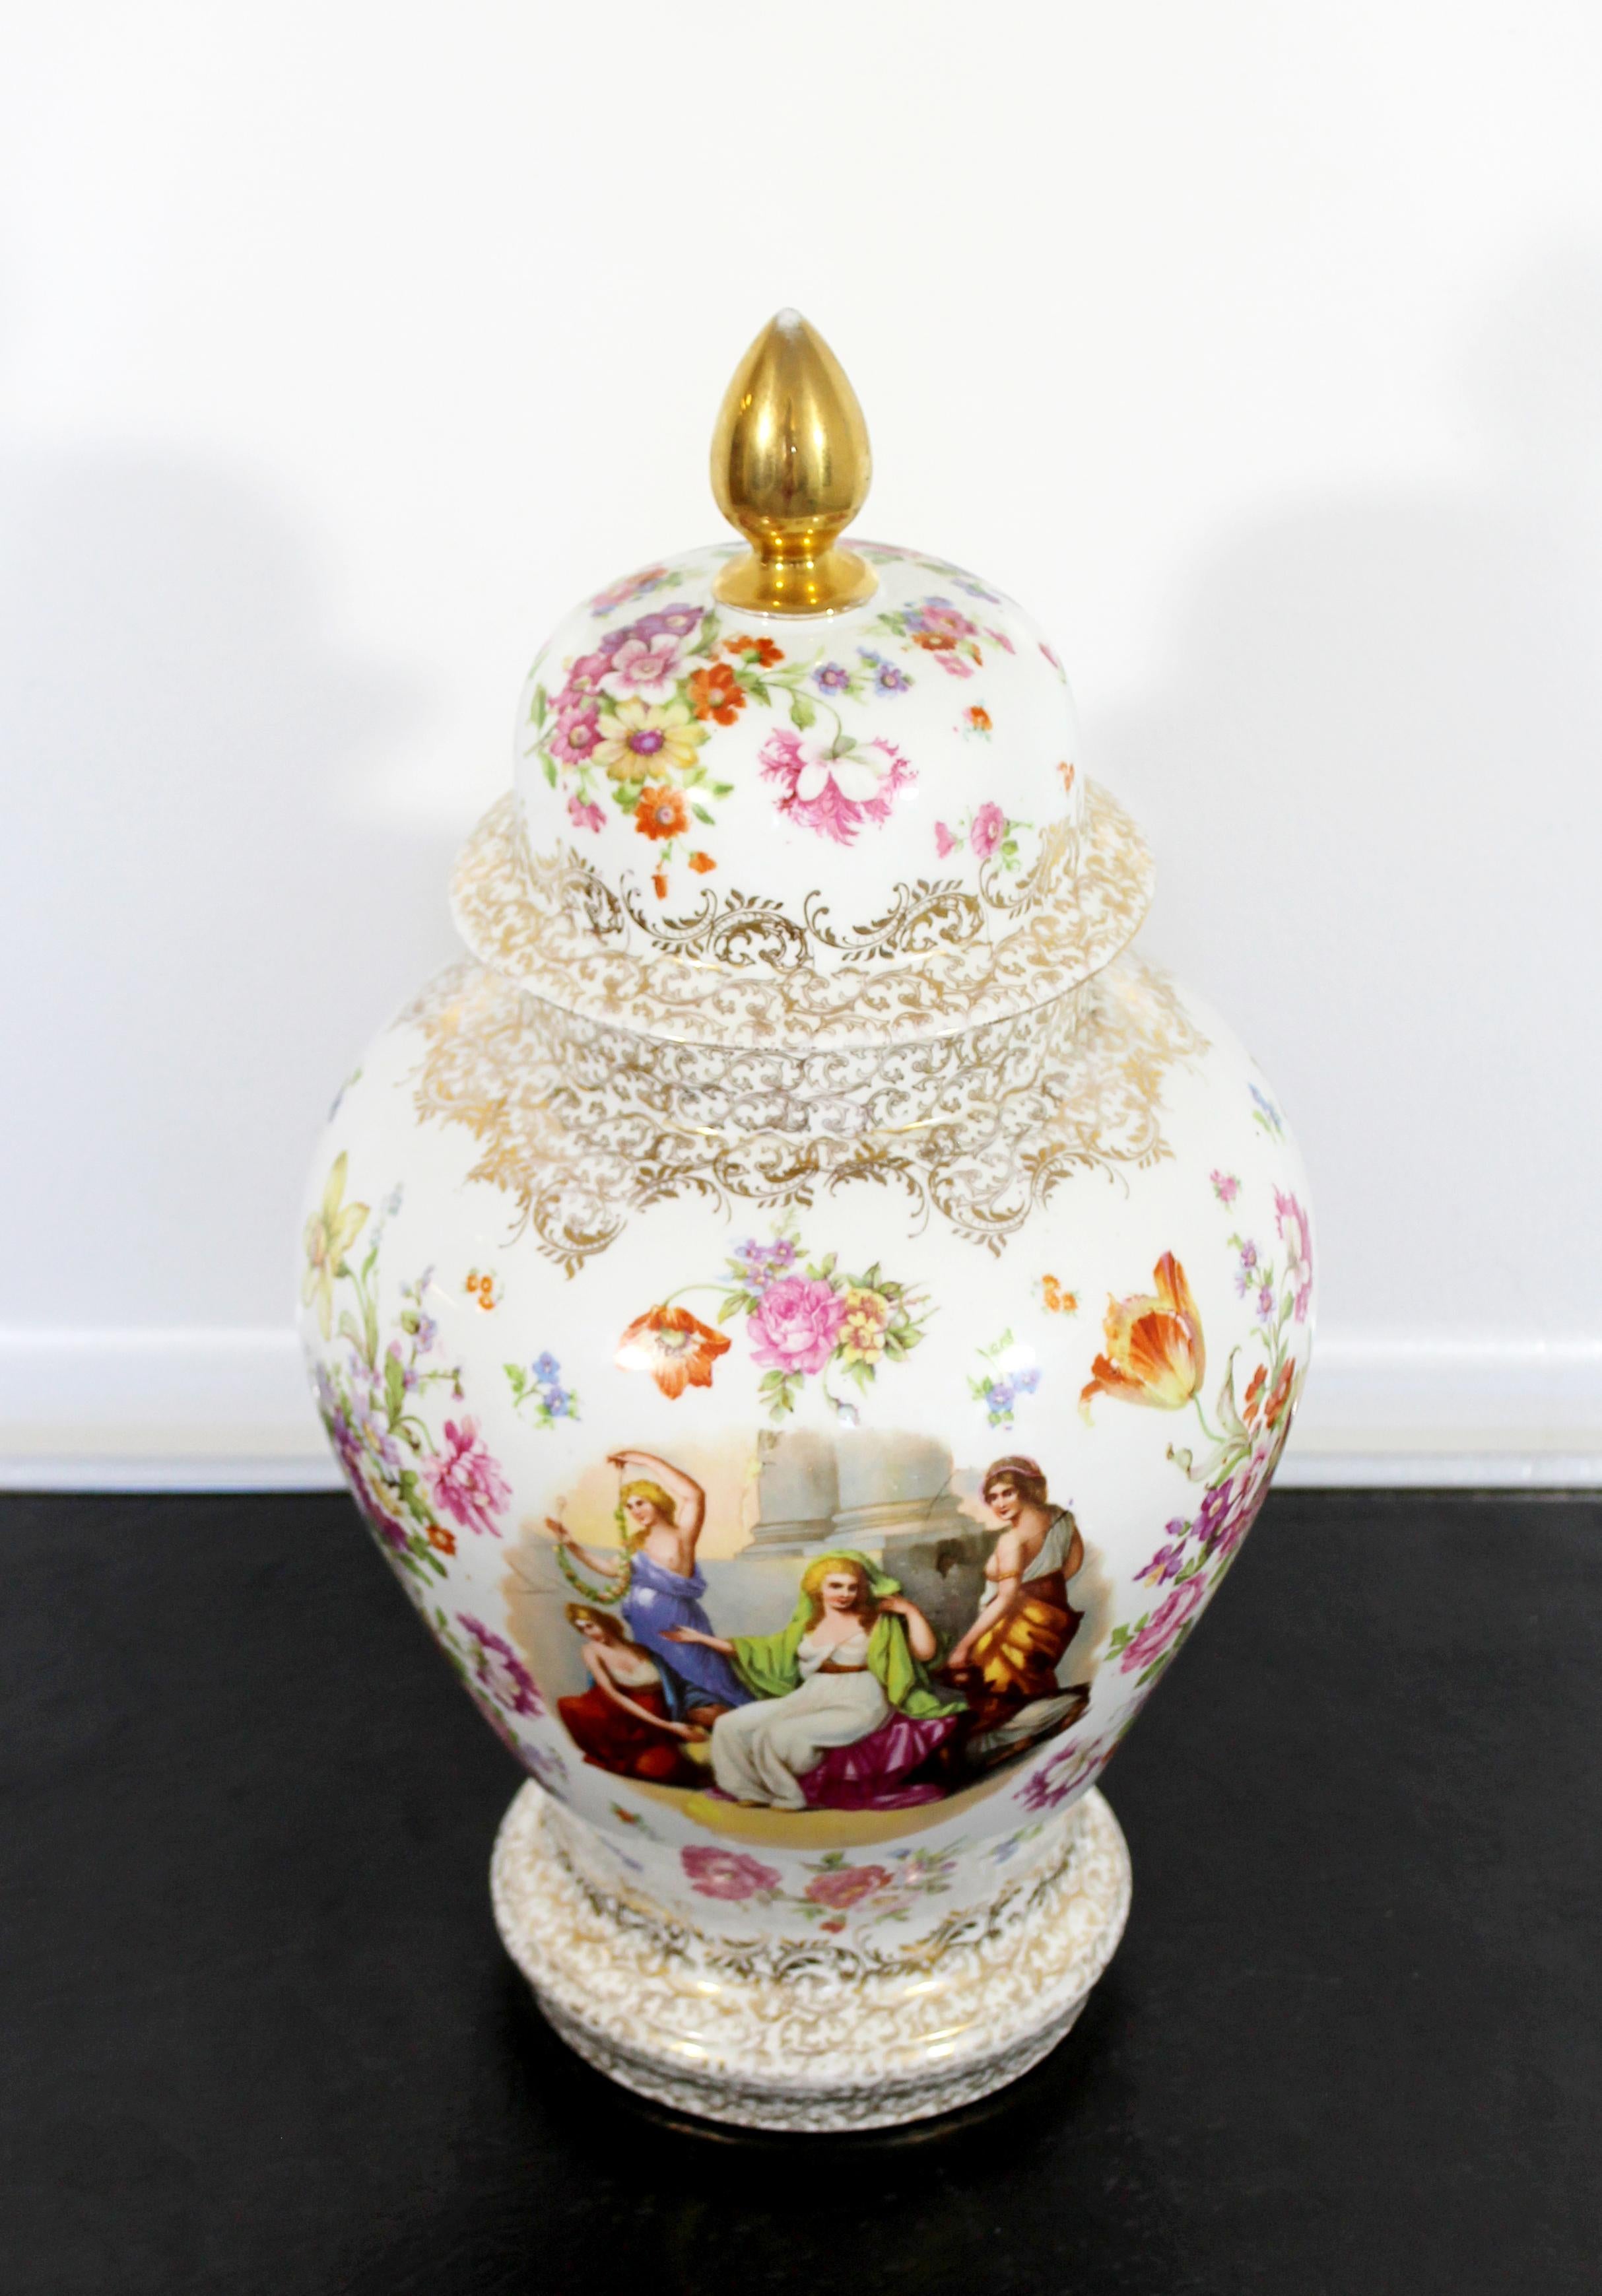 For your consideration is a captivating, white ceramic porcelain urn, with a lovely floral design and picture of women, stamped by Meissen. In excellent condition. The dimensions are 8